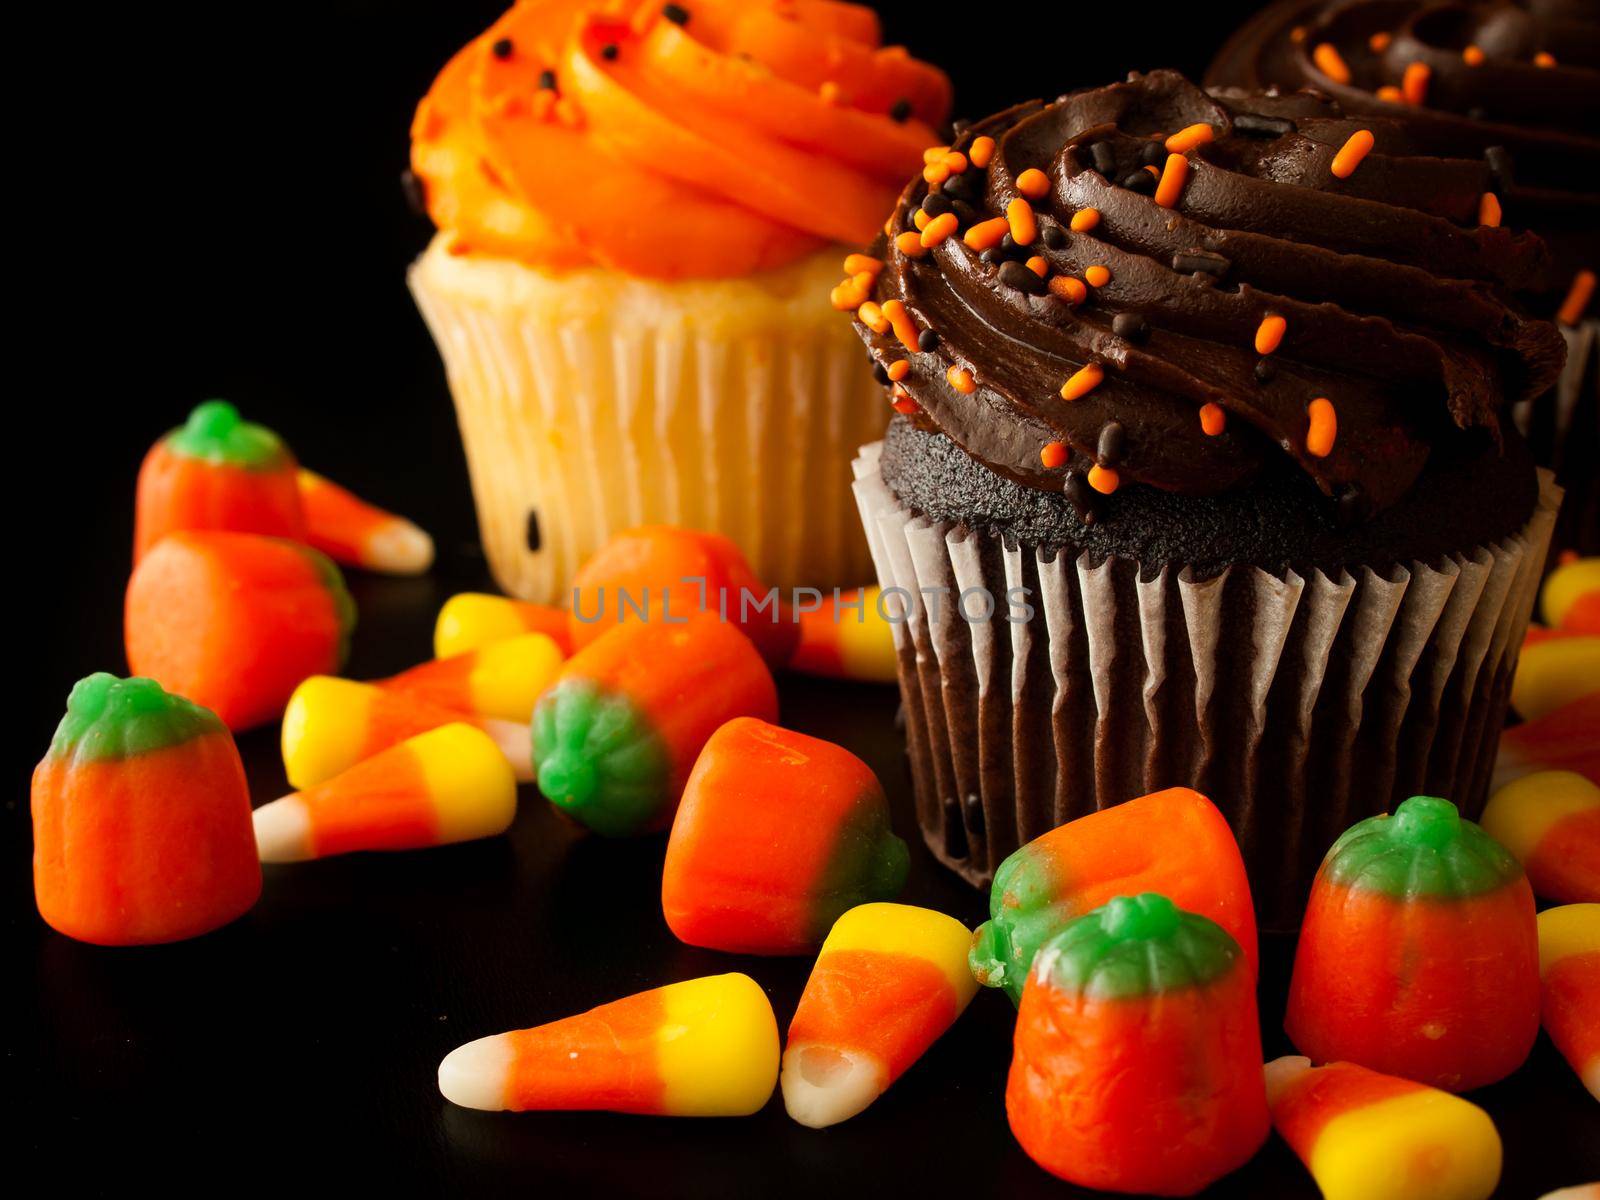 Halloween orange and black cupcakes with candy corn candies on black background.